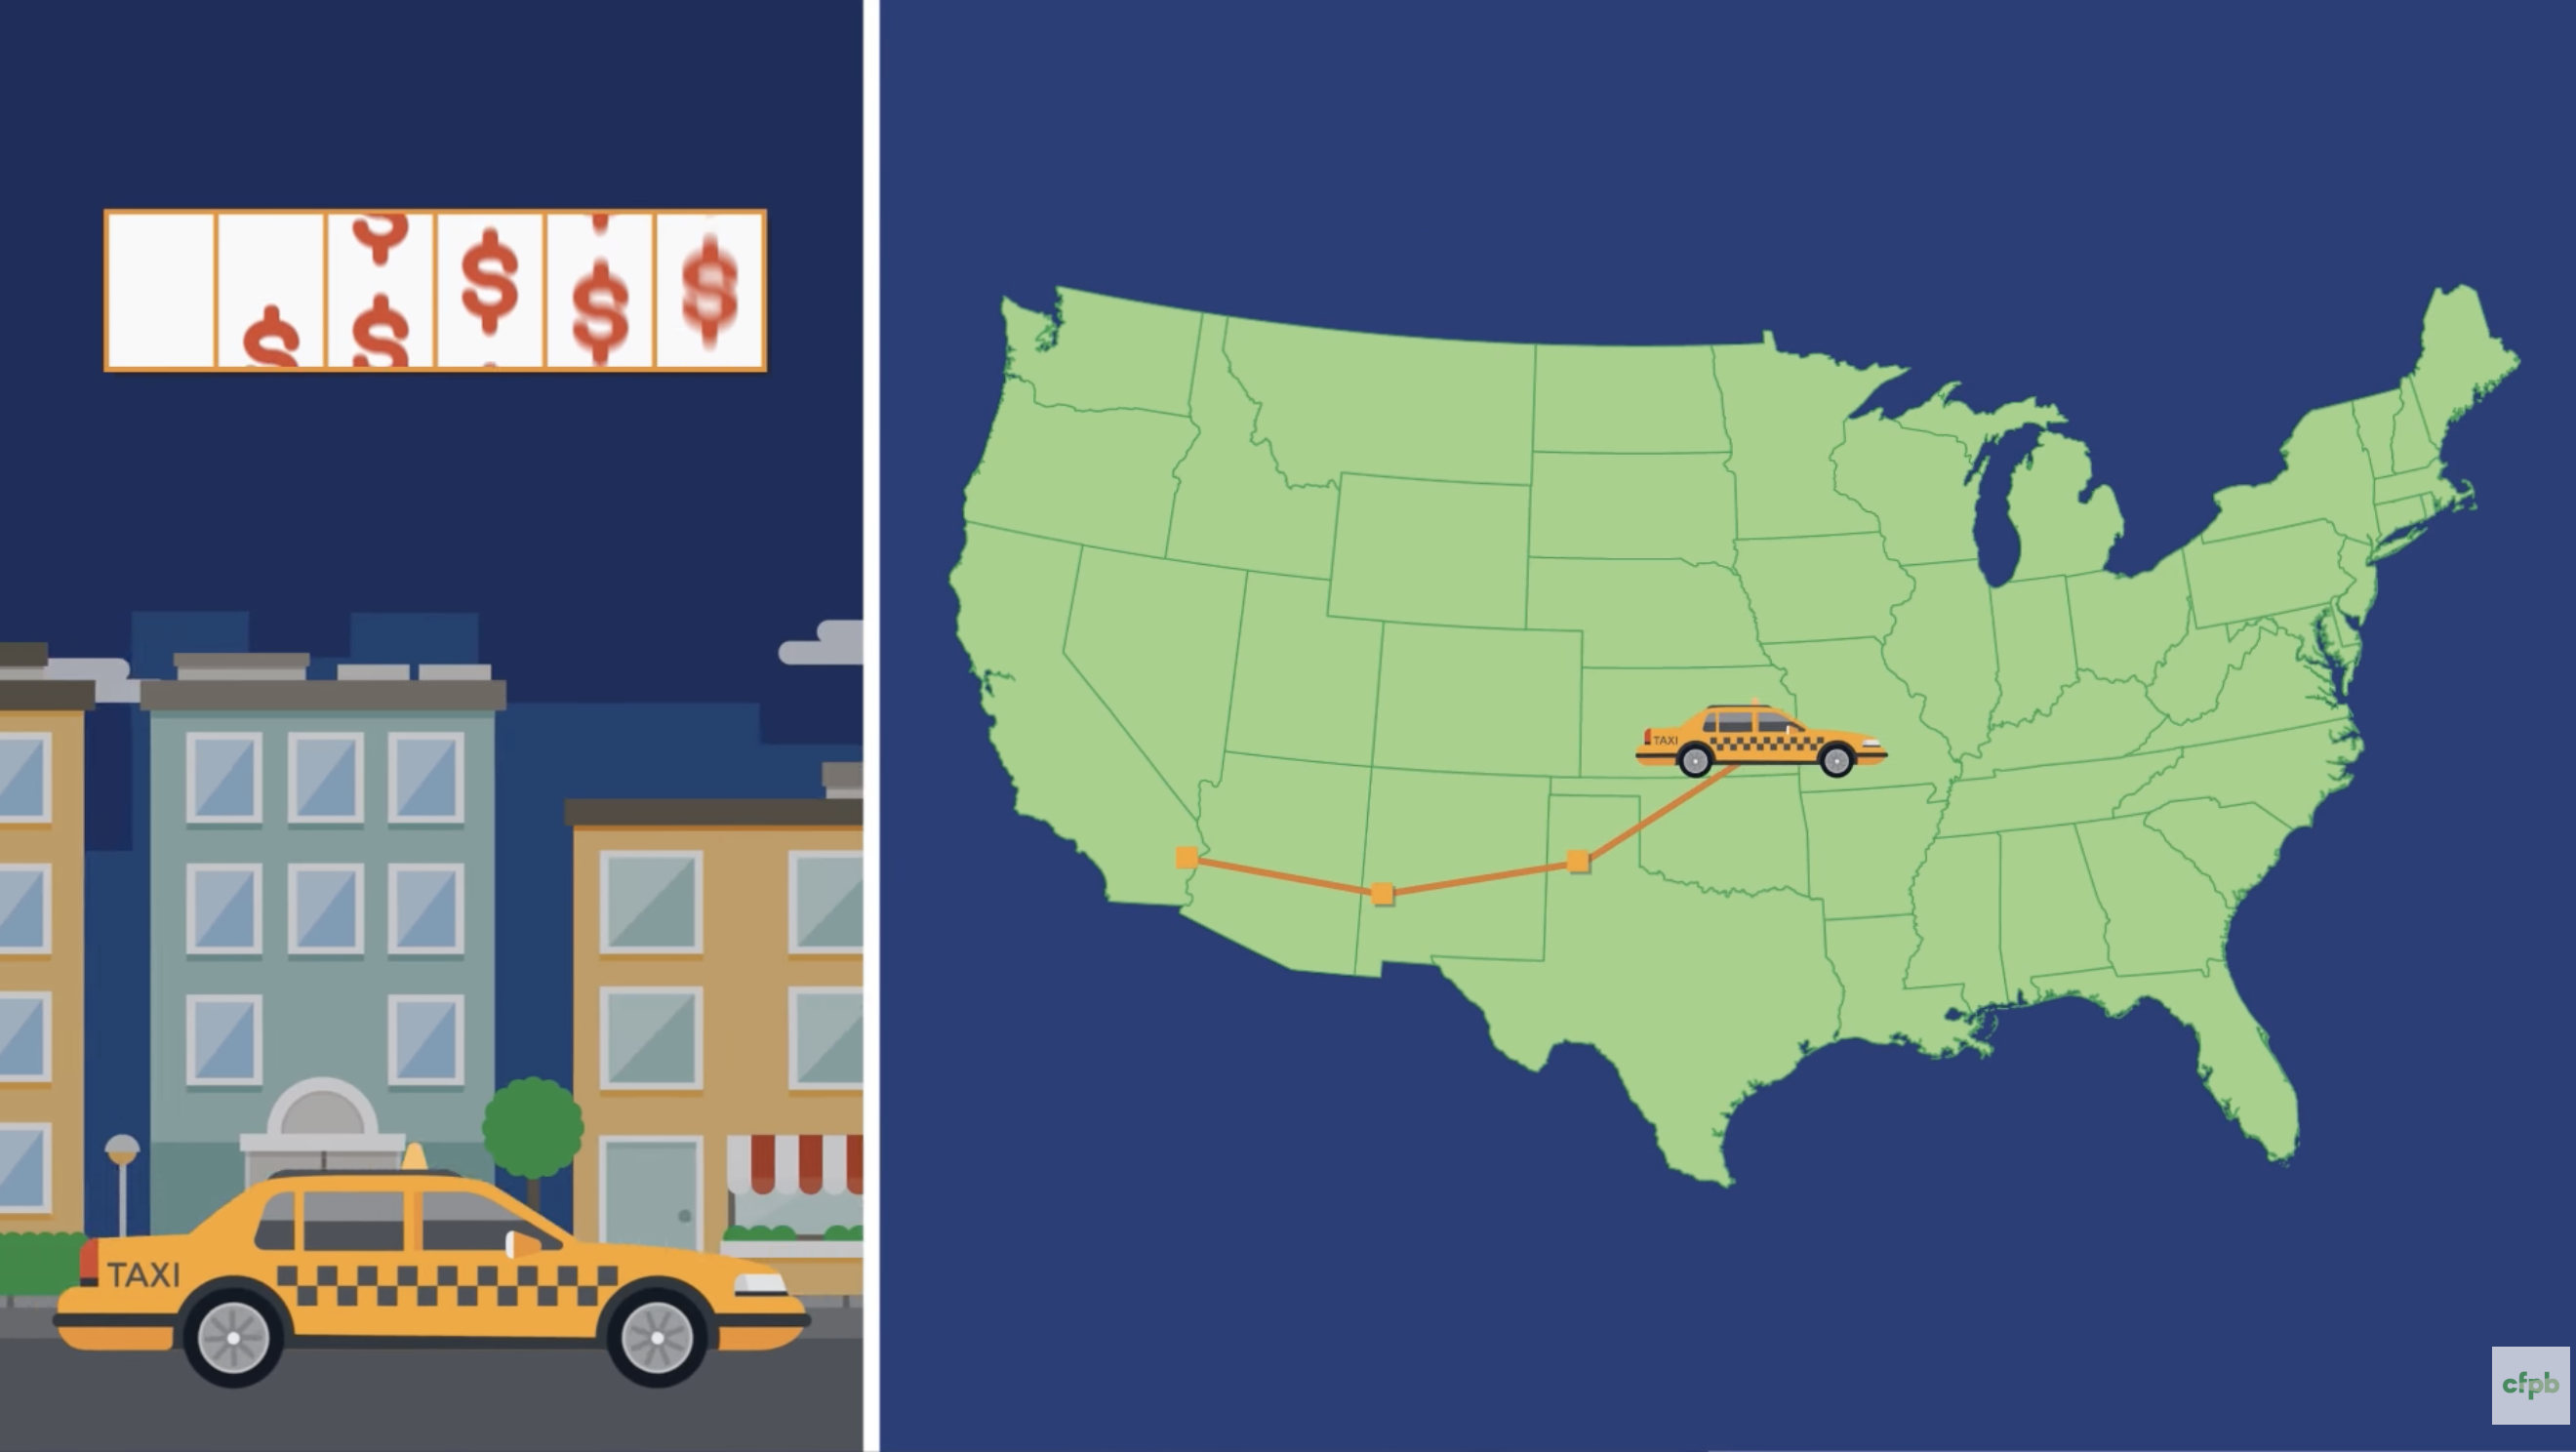 Illustration of a cab driving past buildings on the left side. Illustration of a map of the United States with a car driving across it on the right side.